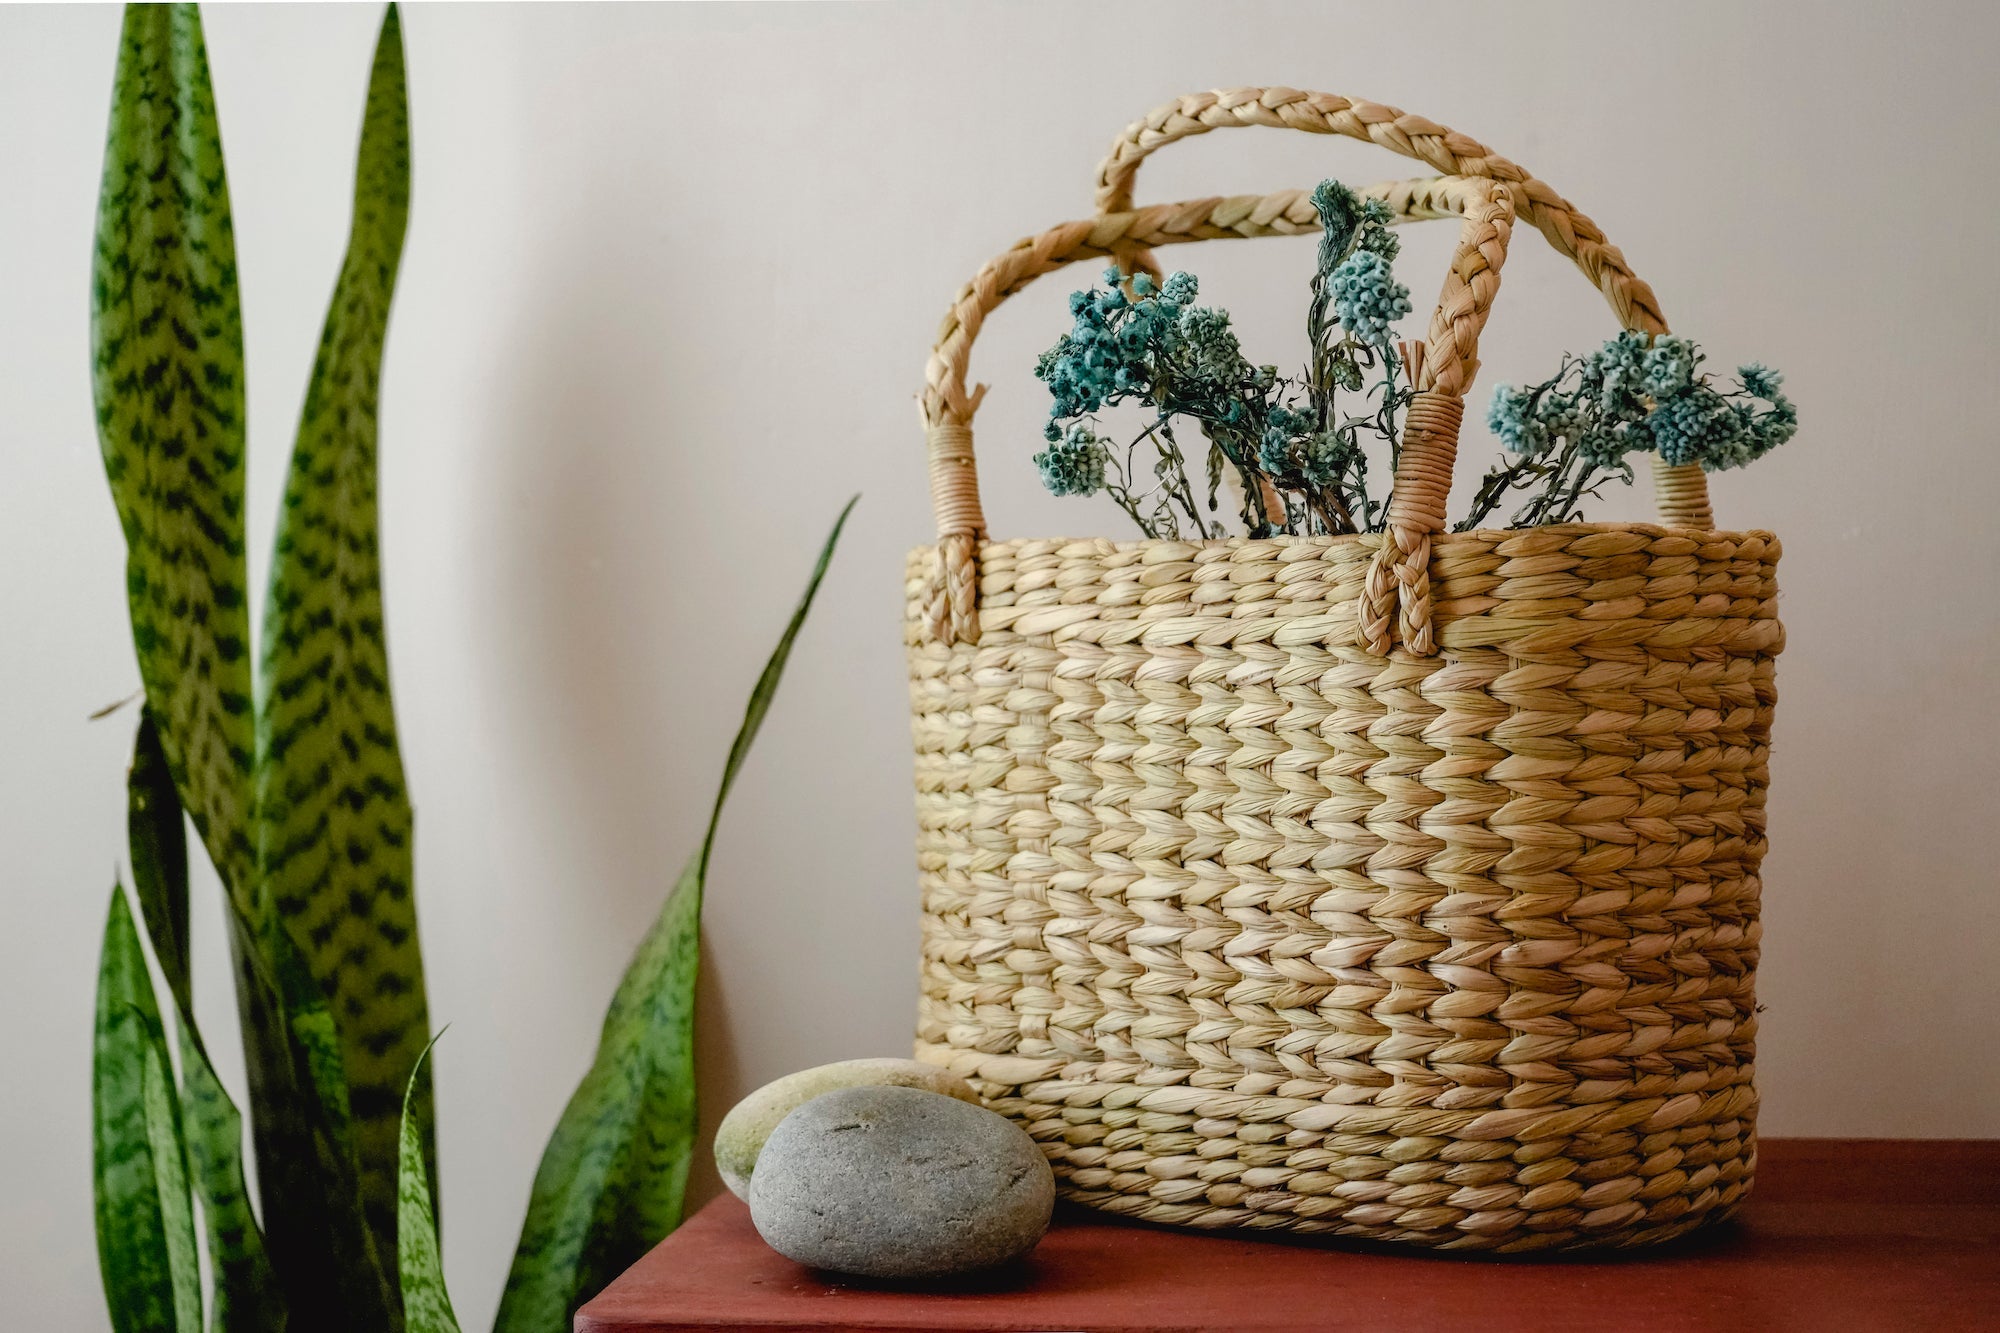 Aesthetics - Kauna Grass Bag is everything that's sustainable, durable and  stylish. Beautiful Kauna grass bag hand-woven by the skilled artisans of  Manipur using indigenous, locally sourced Kauna reeds and traditional  weaving